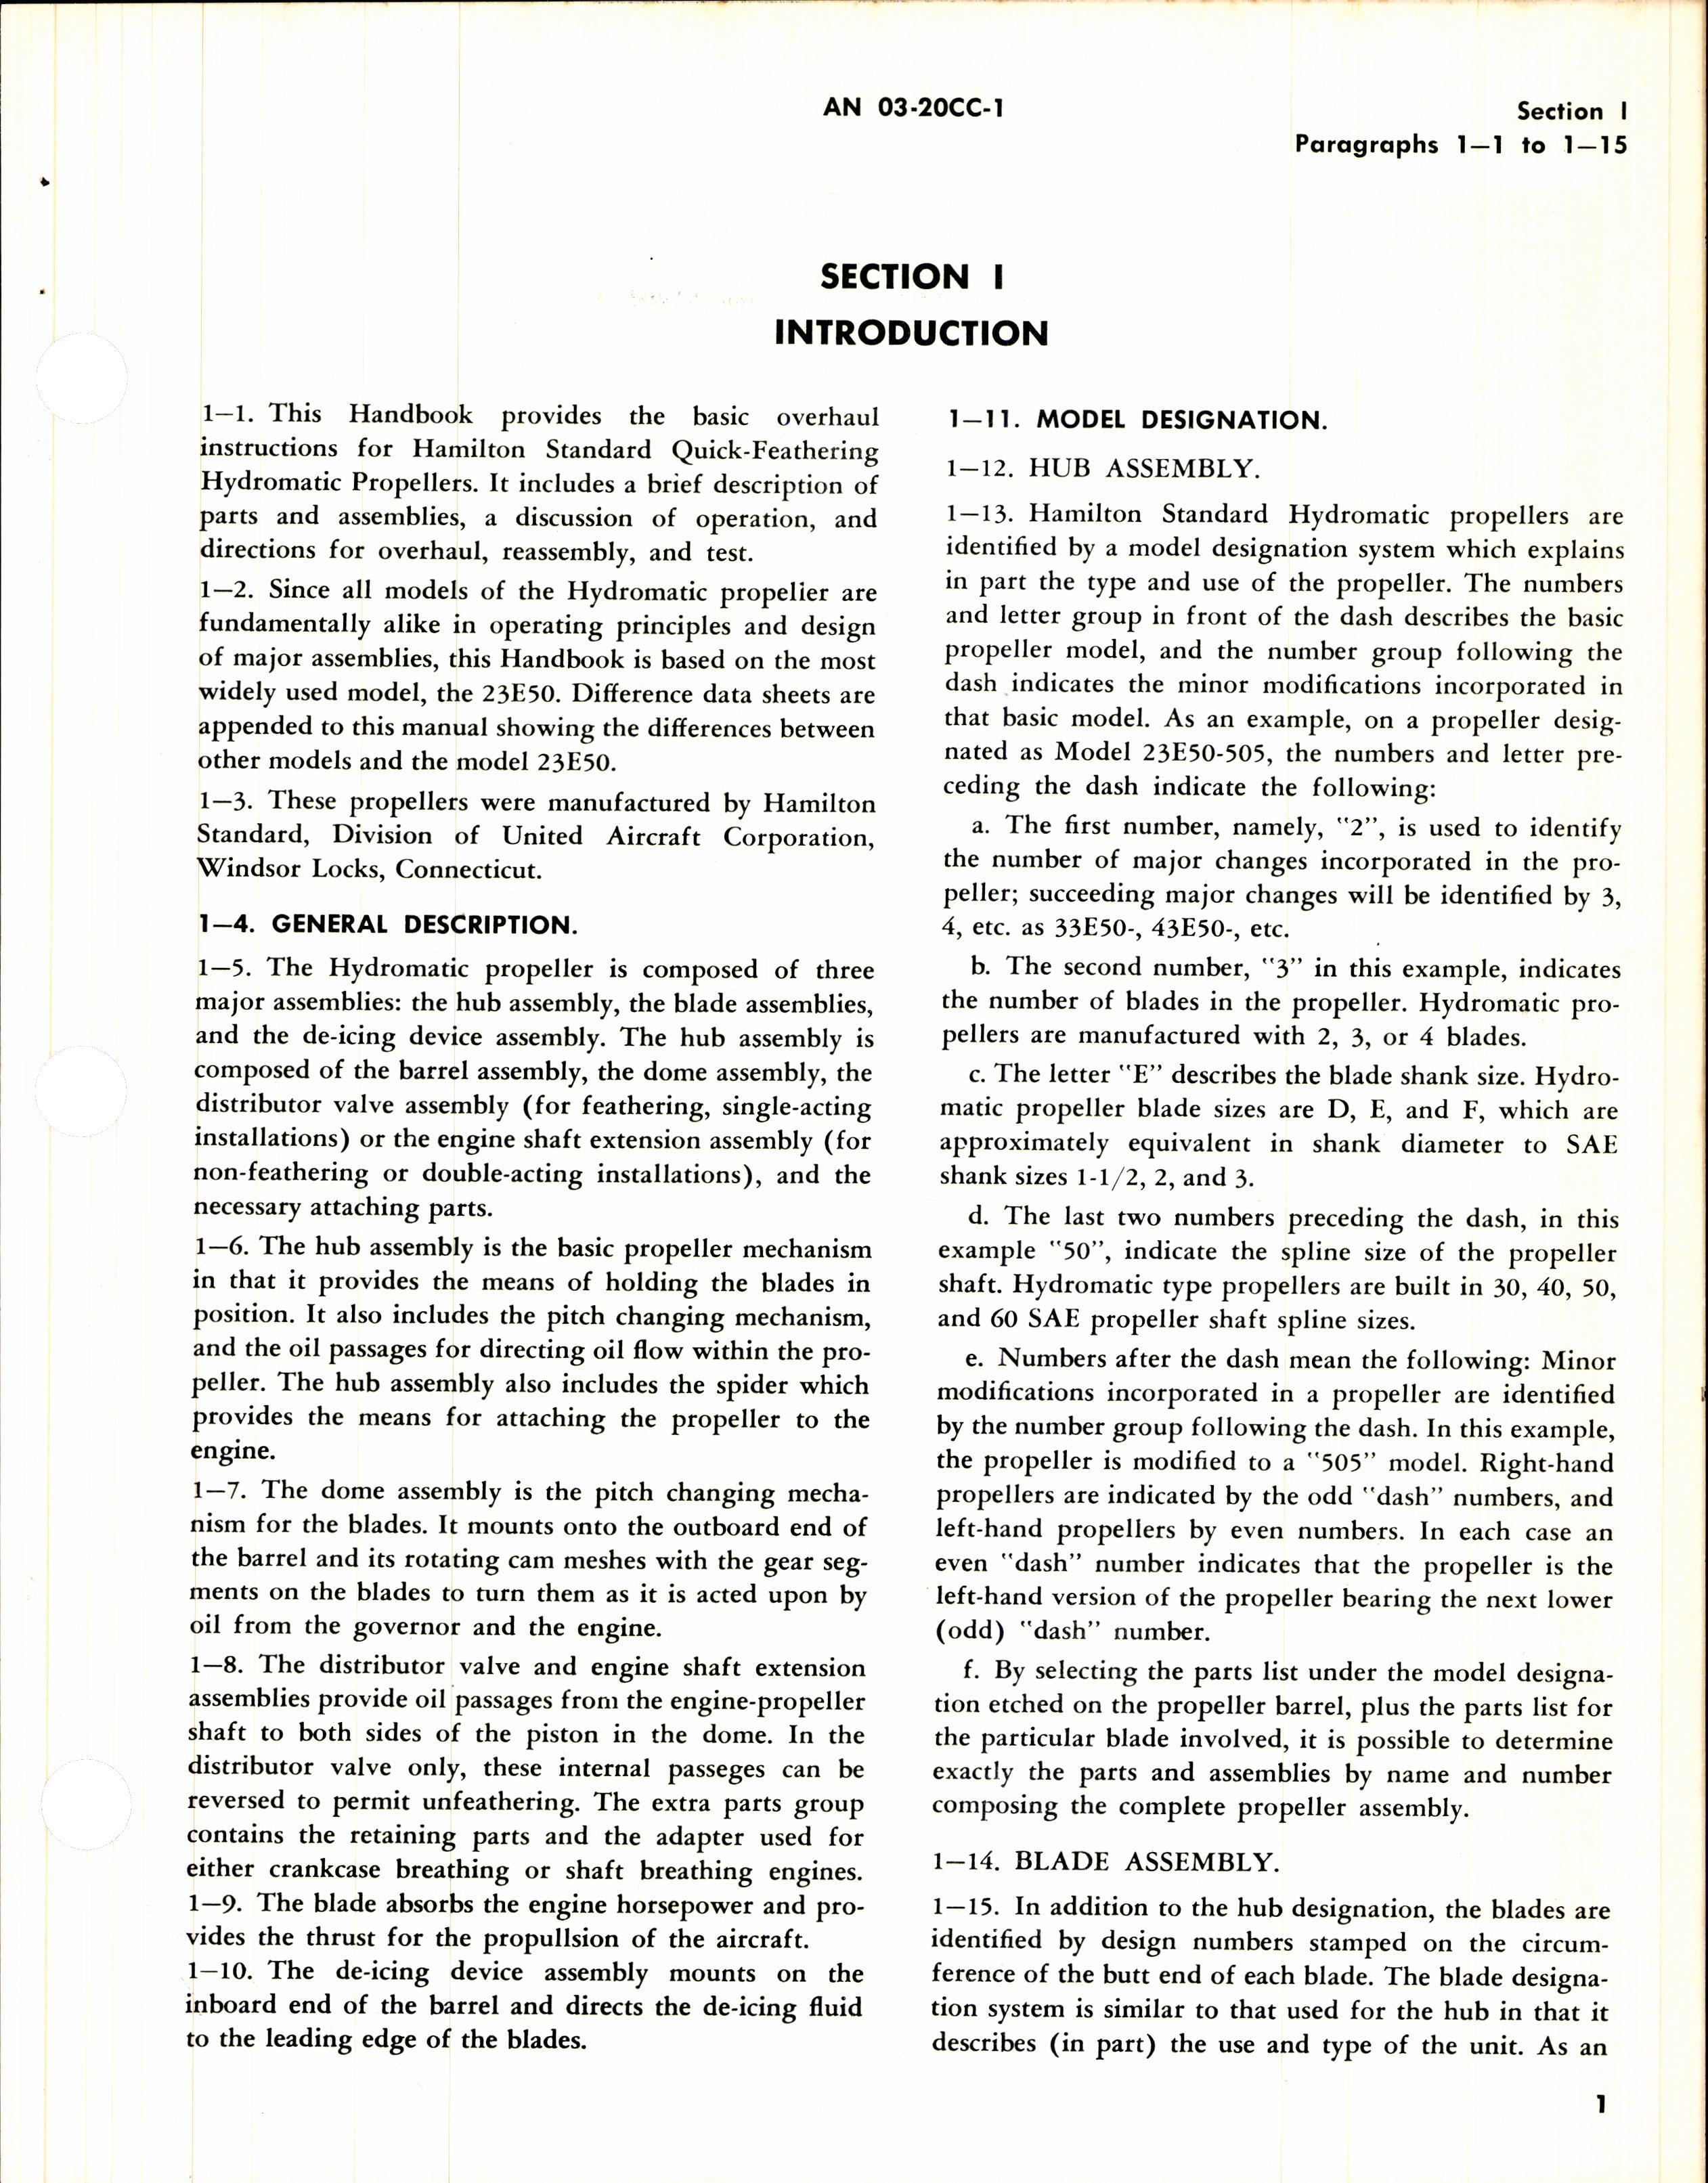 Sample page 5 from AirCorps Library document: Overhaul Instructions for Hydromatic Propellers